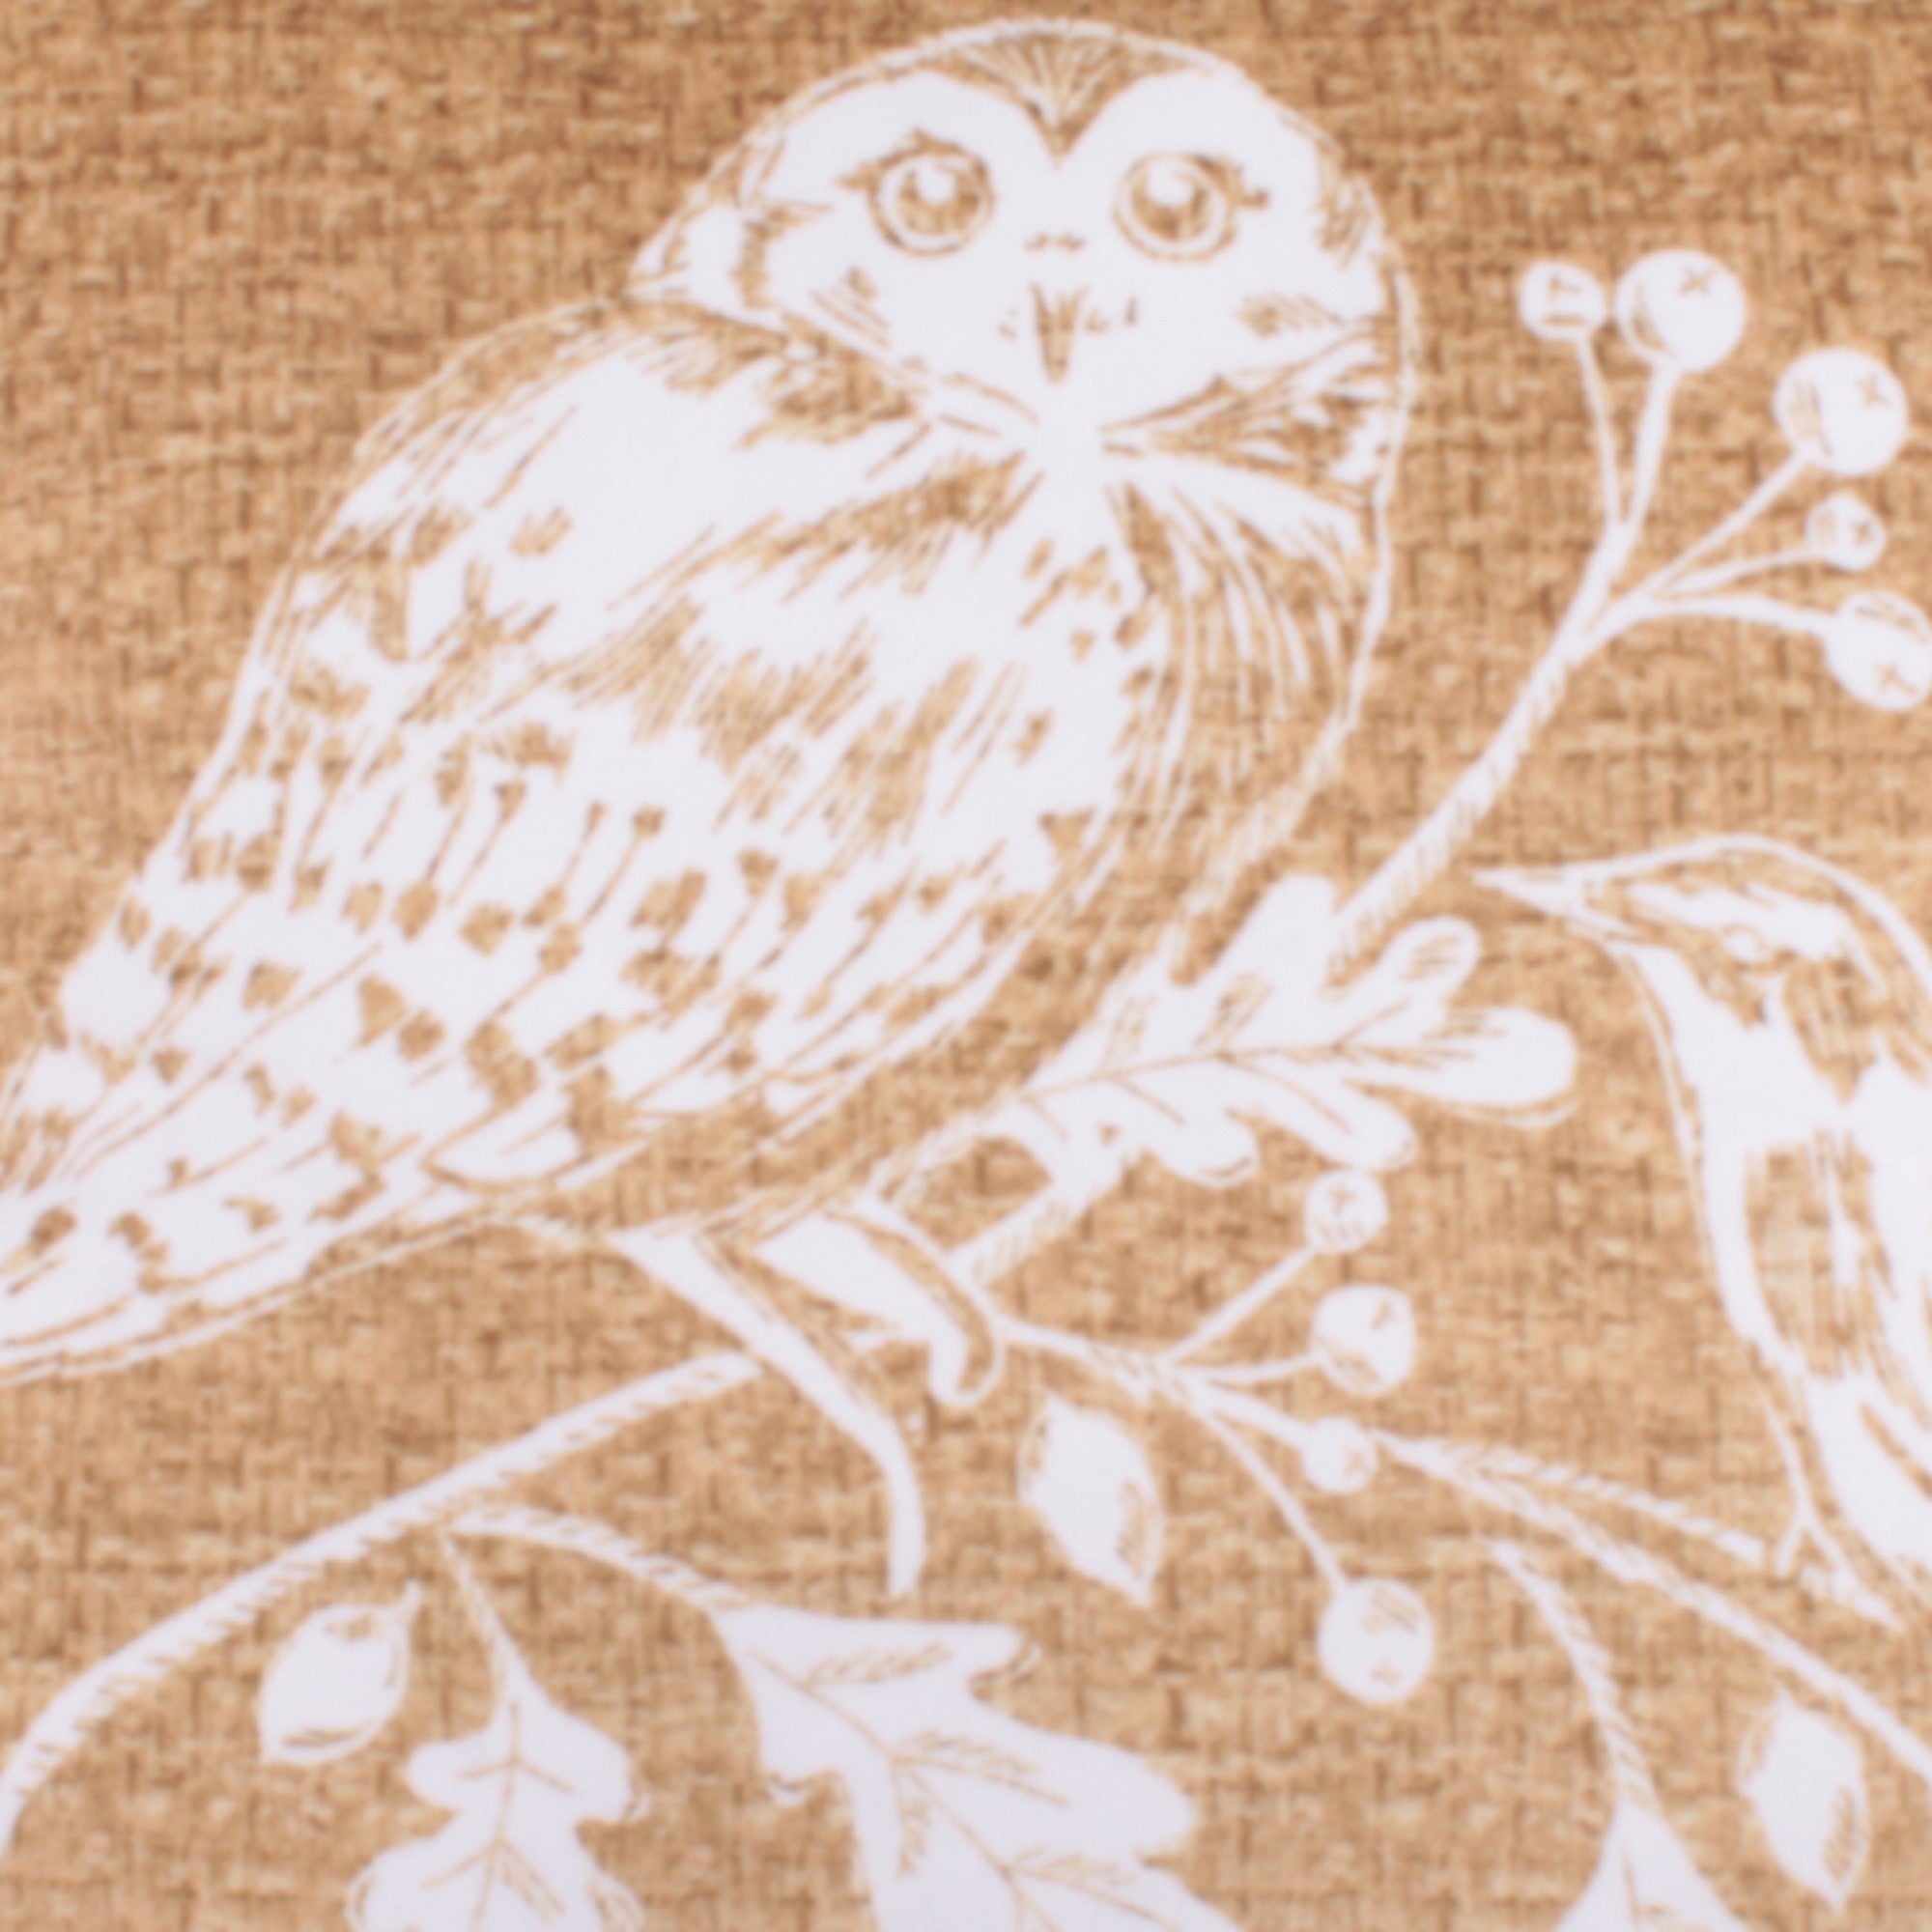 Cushion Cover Woodland Owls by D&D Lodge in Ochre